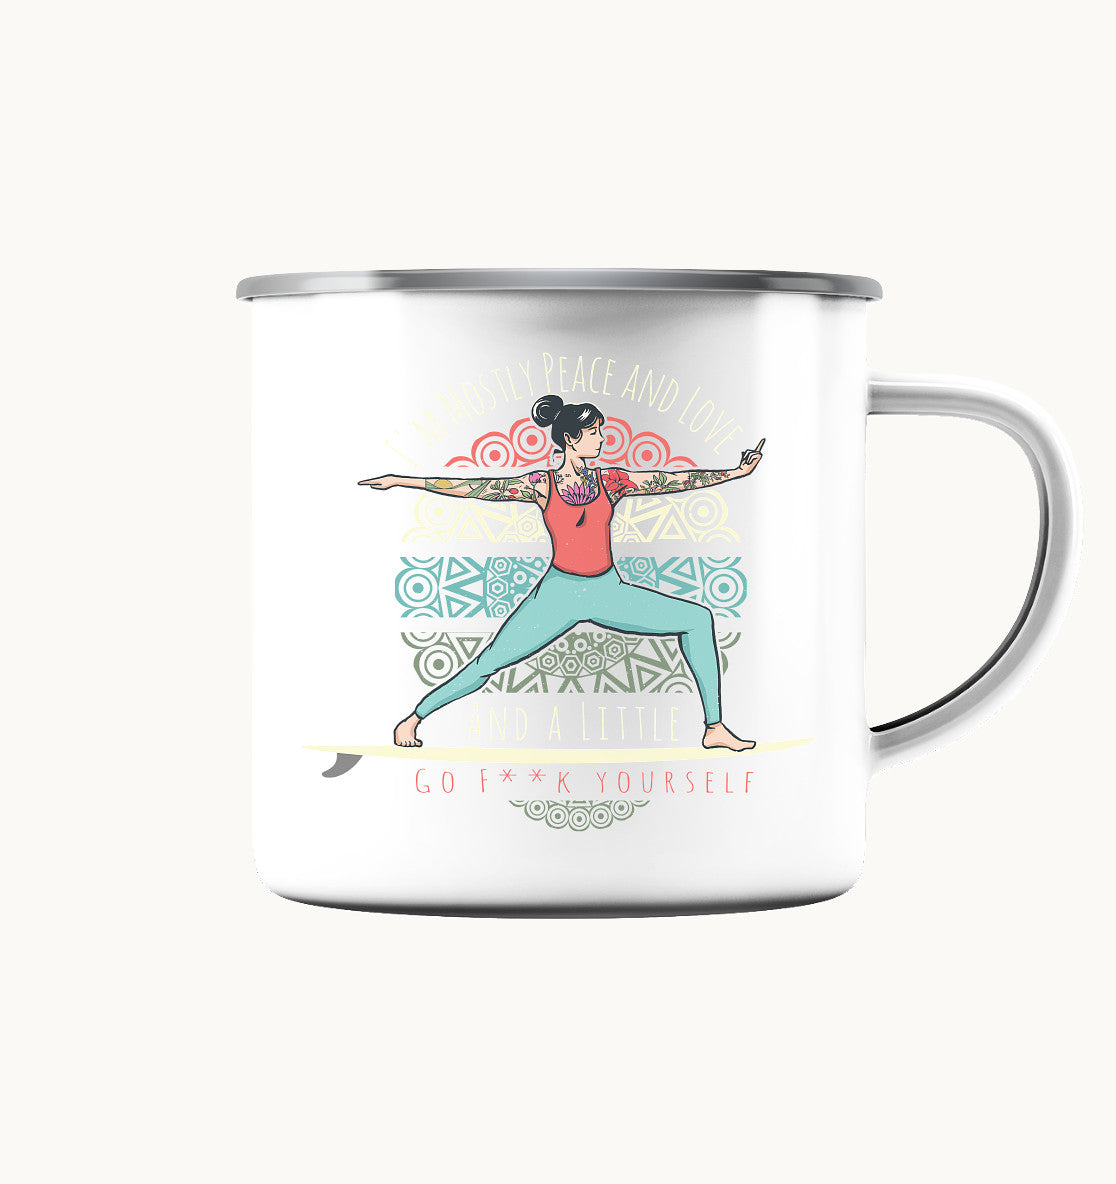 SUP-Yoga Peace and Love - Emaille Tasse